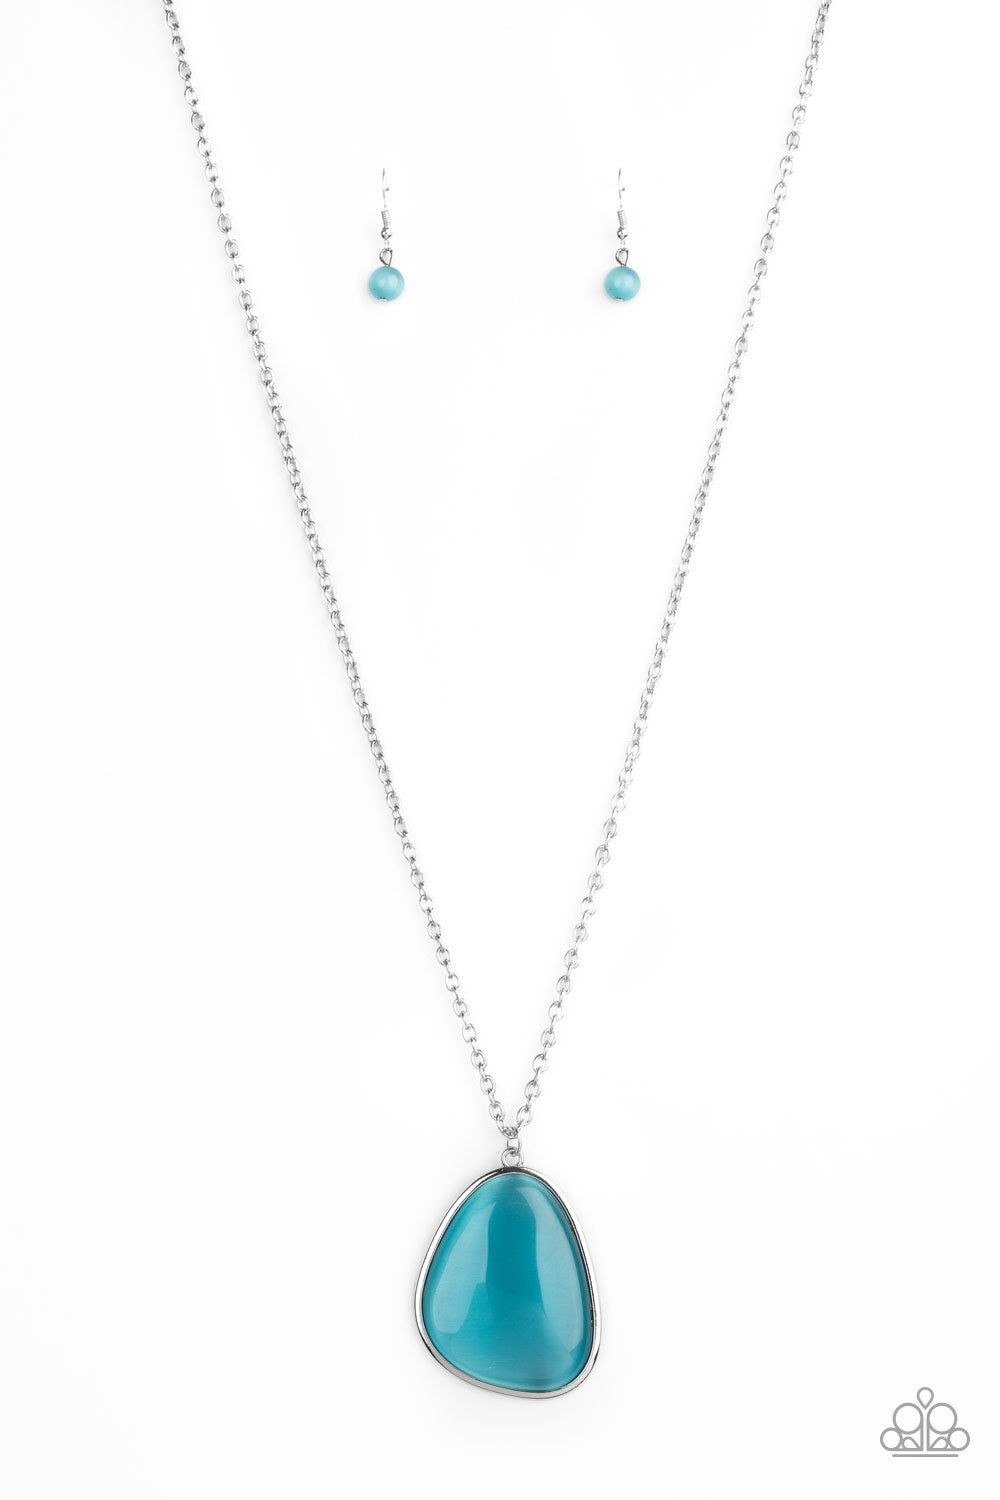 Paparazzi Necklaces - Ethereal Experience - Blue